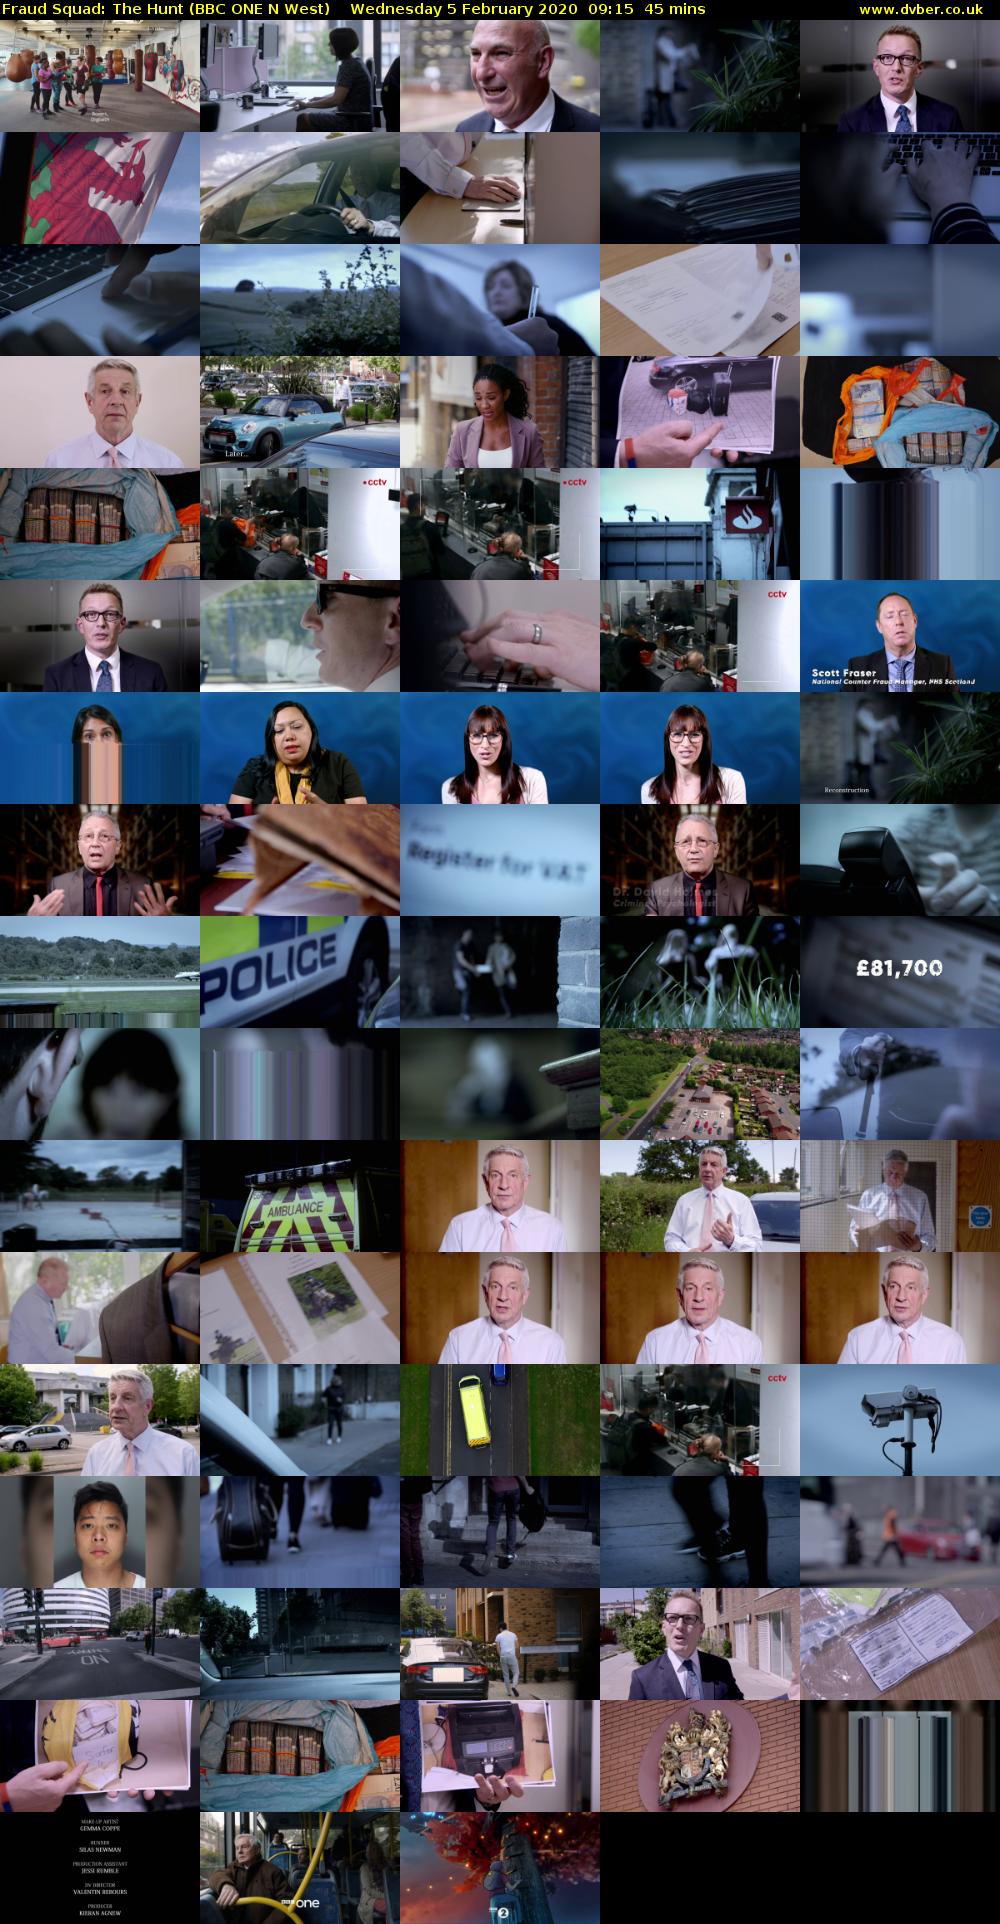 Fraud Squad: The Hunt (BBC ONE N West) Wednesday 5 February 2020 09:15 - 10:00